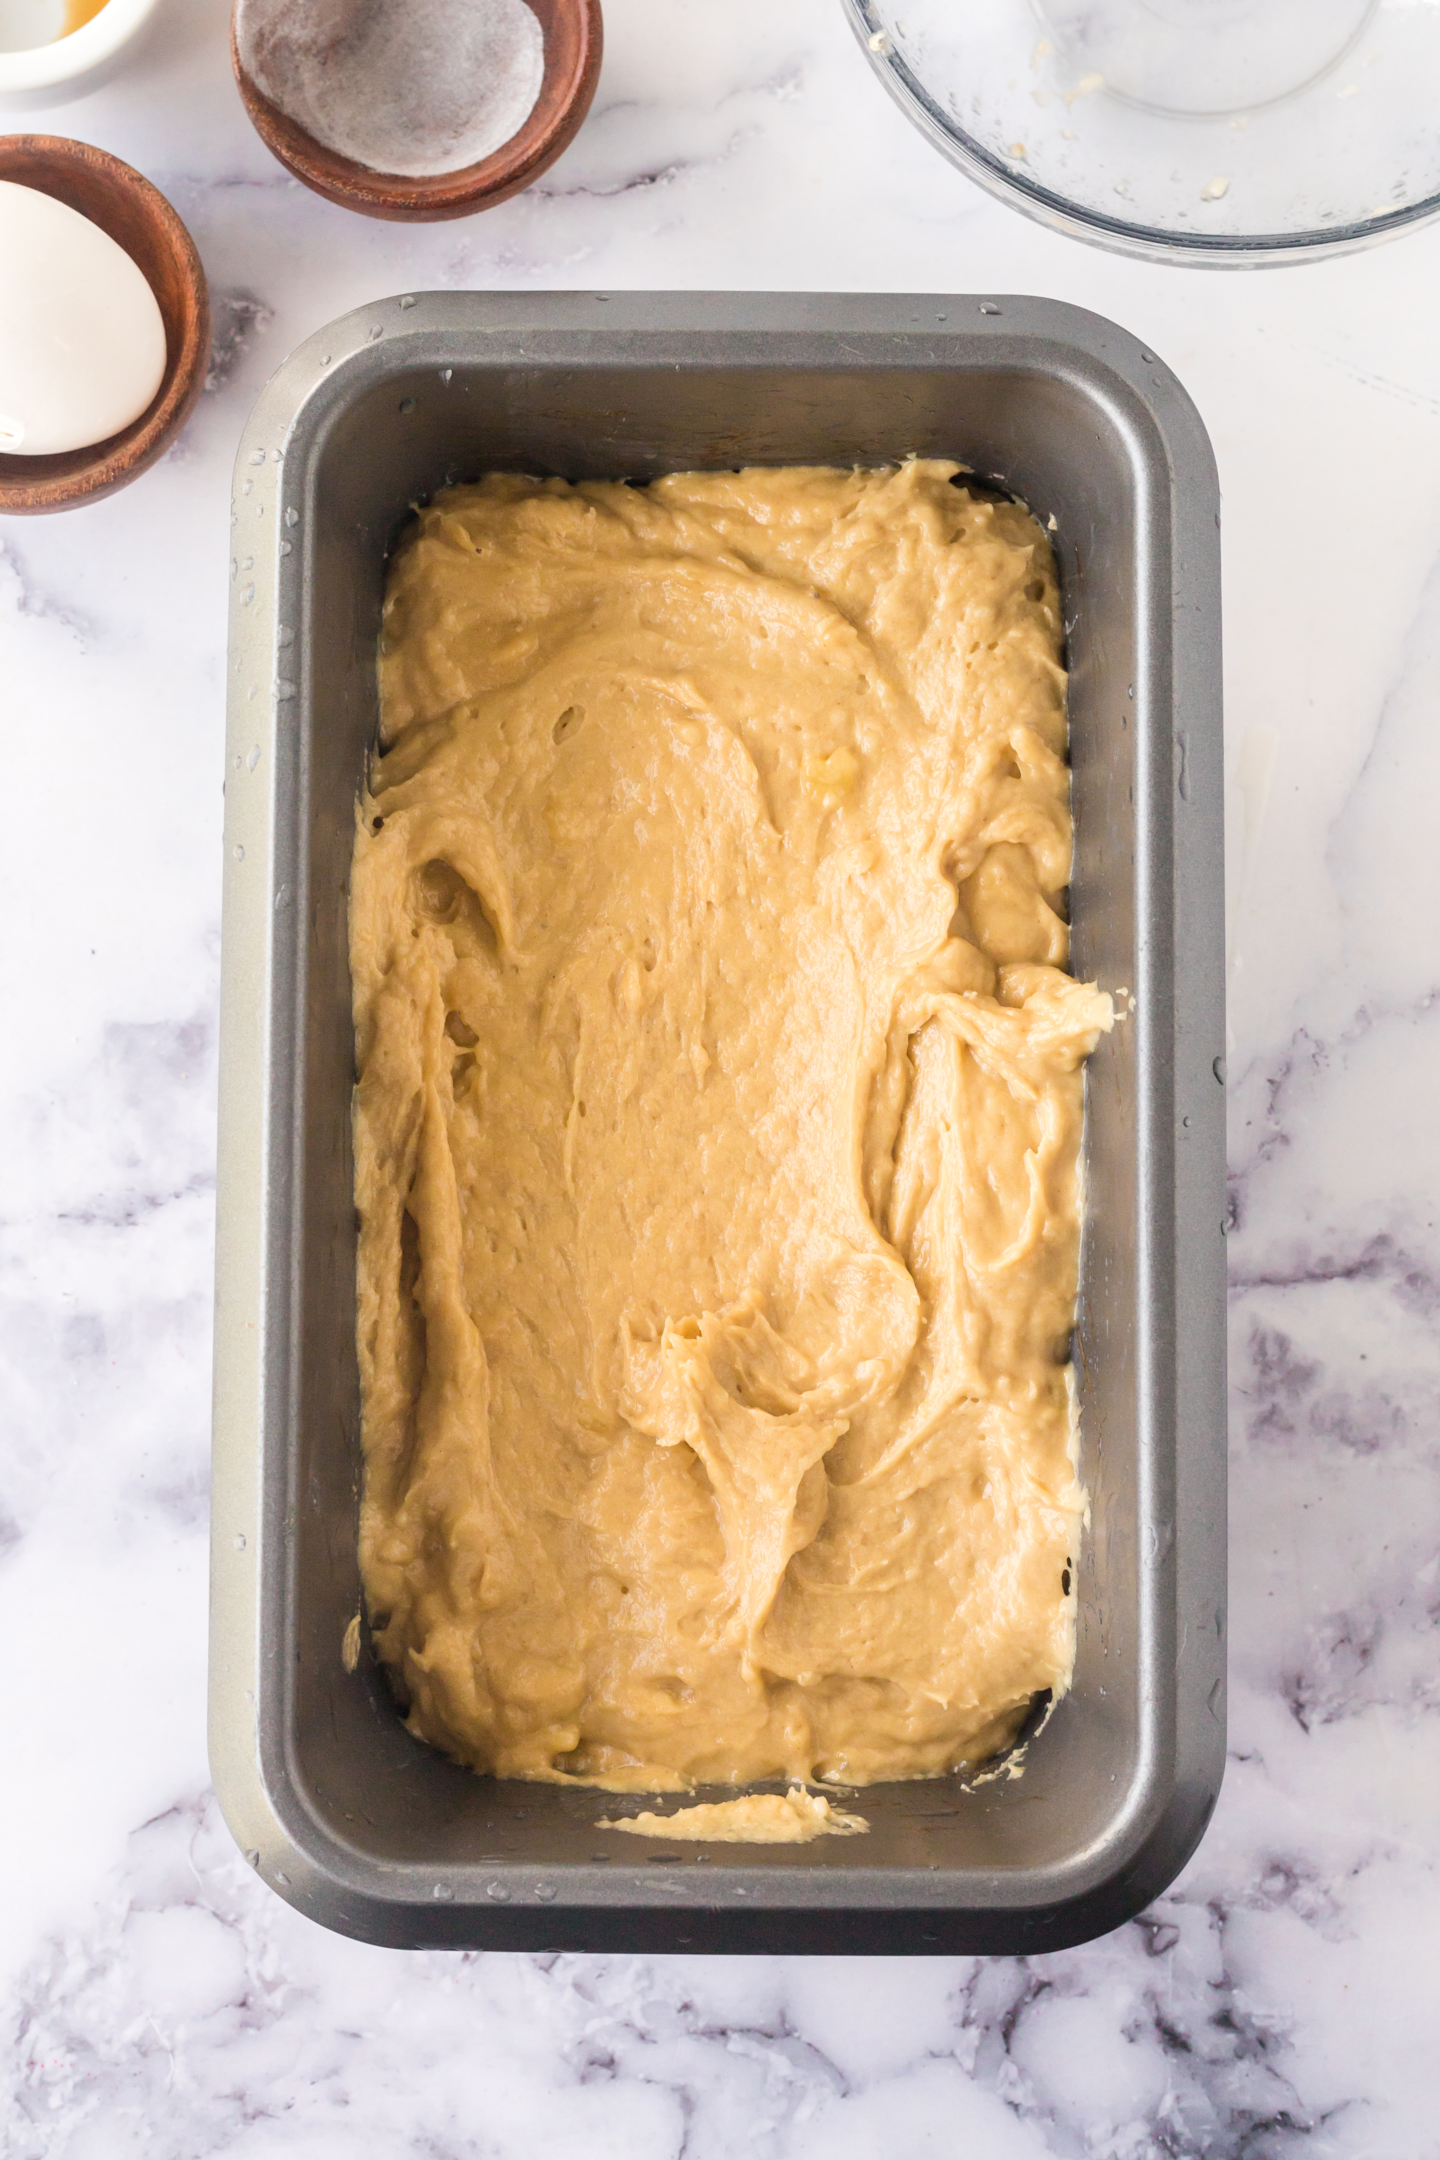 unbaked banana bread batter in a loaf pan